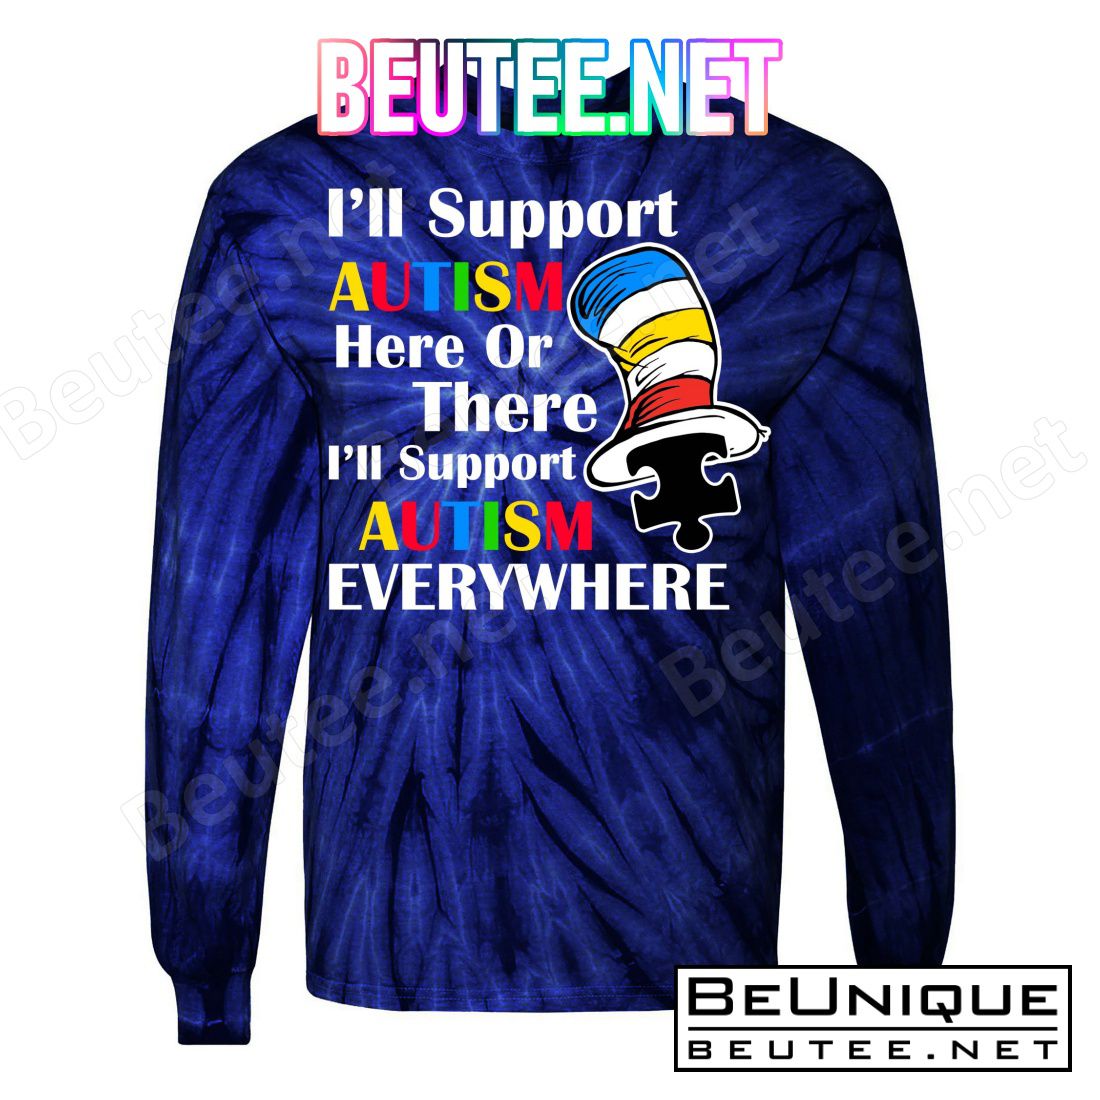 Support Autism Here Or There And Everywhere T-Shirts